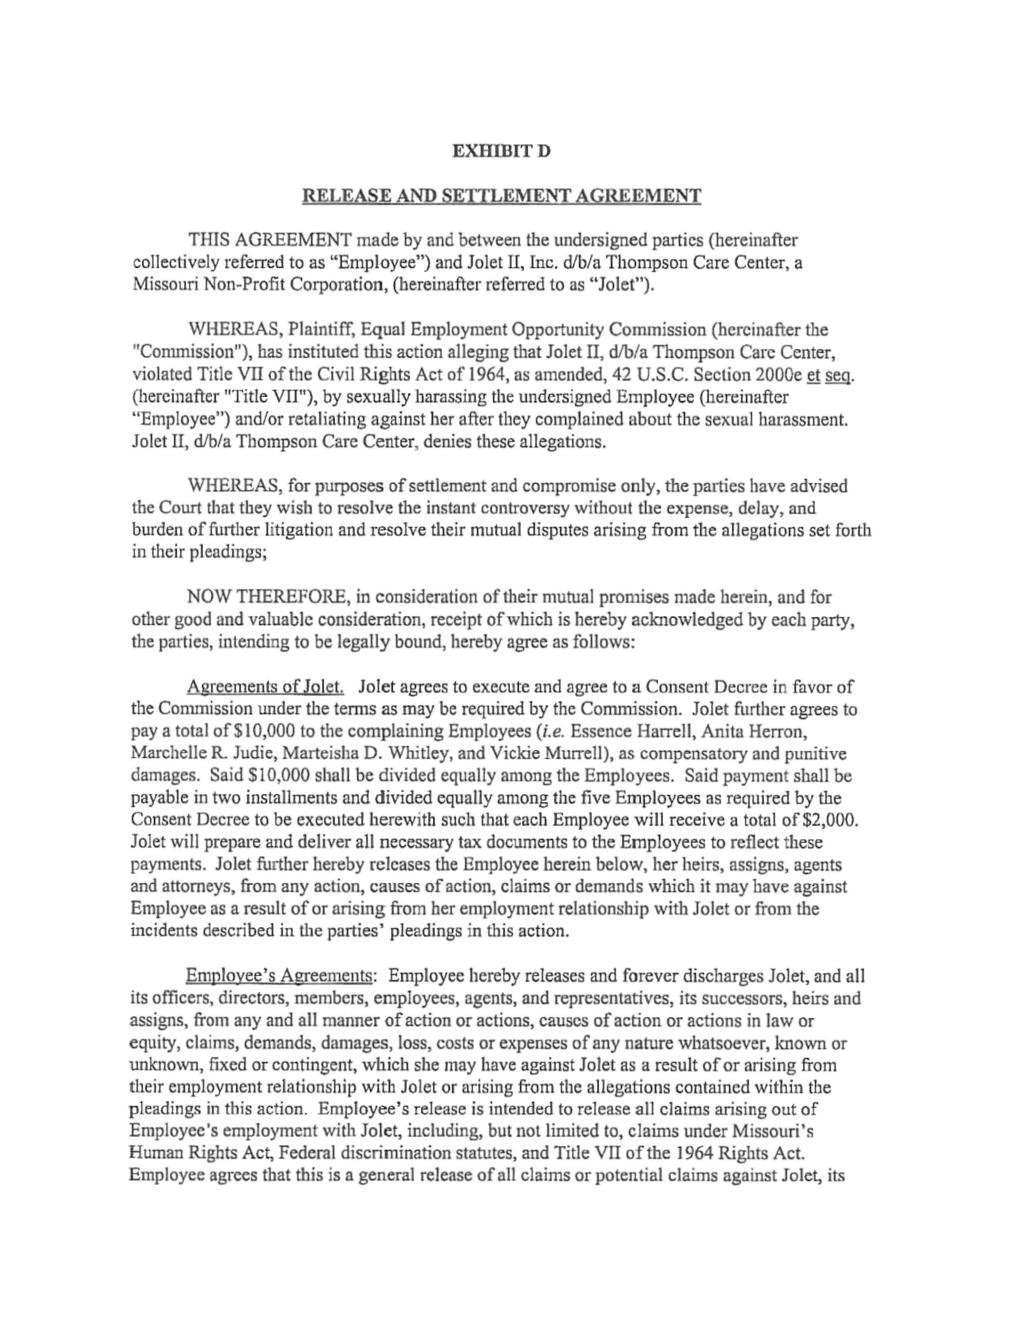 EXHIBIT D RELEASE AND SETTLEMENT AGREEMENT THIS AGREEMENT made by and between the undersigned parties (hereinafter collectively referred to as "Employee") and Jolet II, Inc.